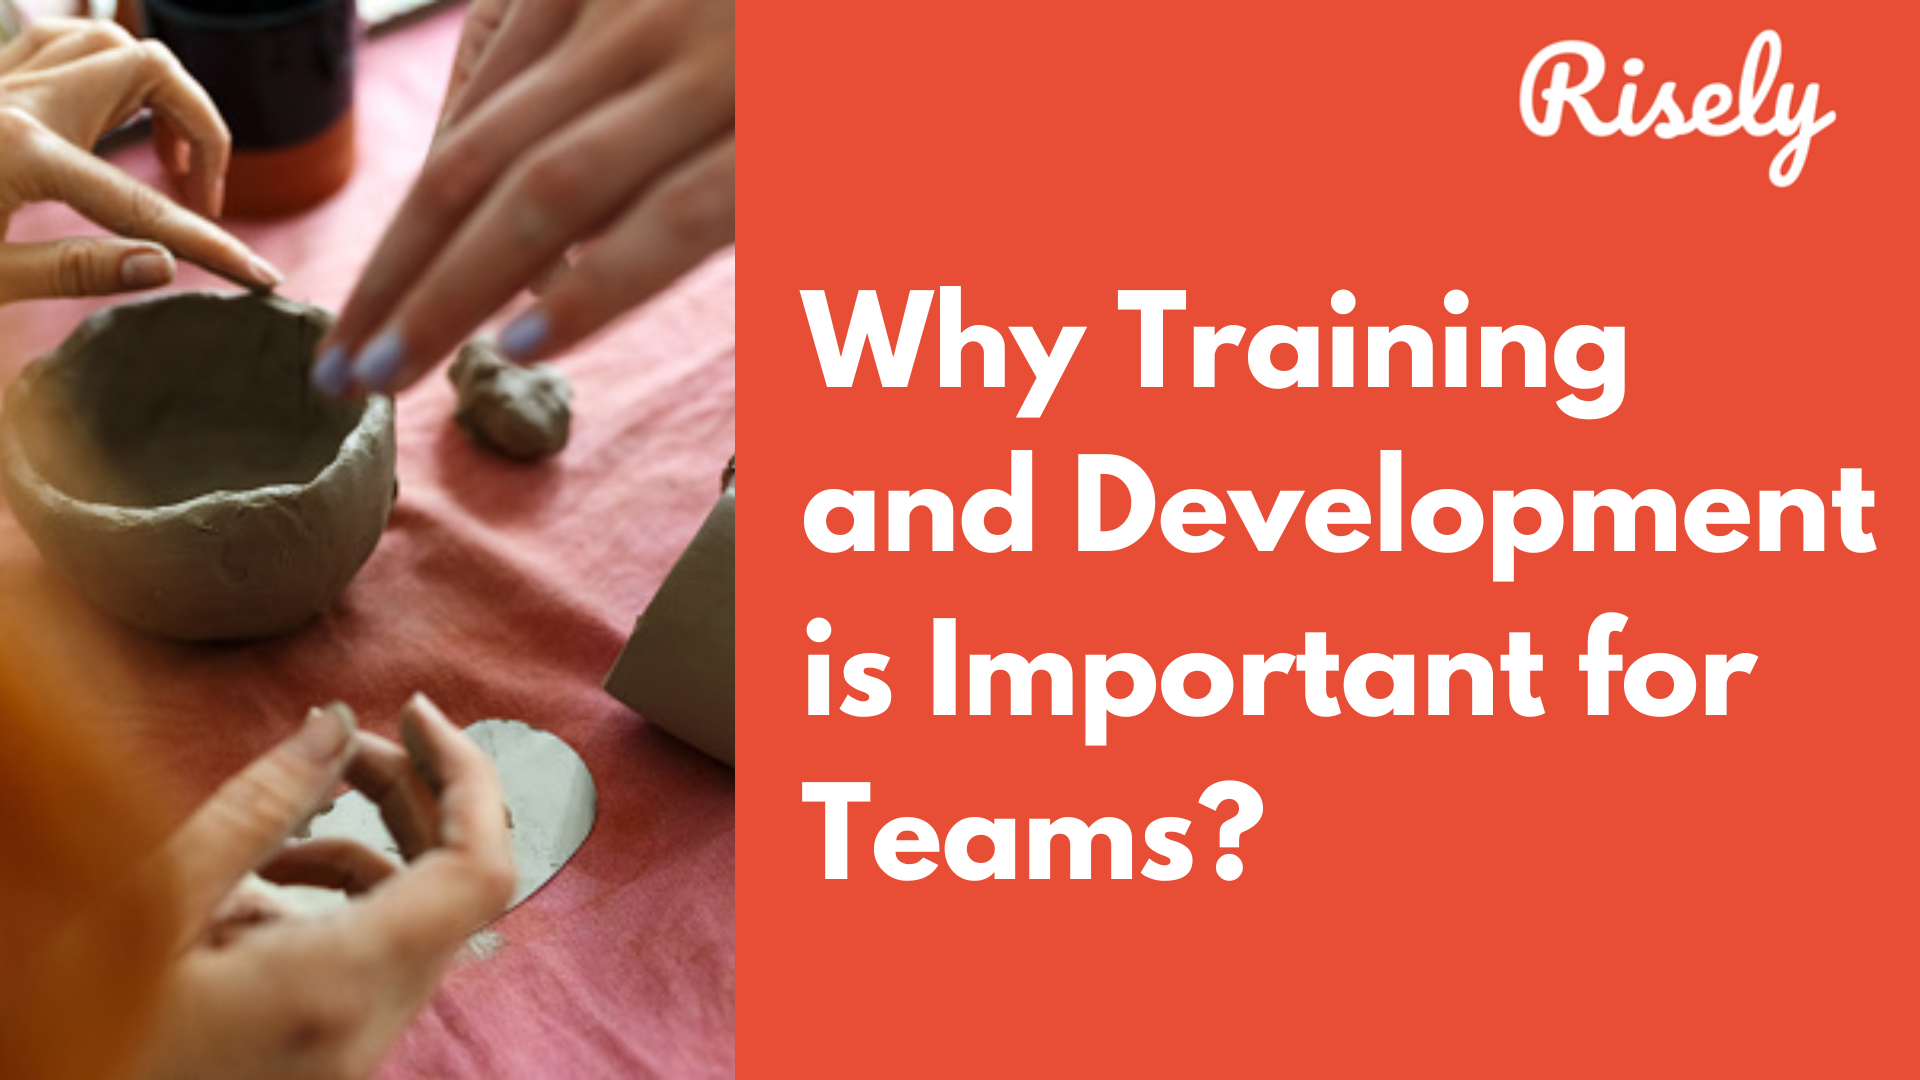 Why Training and Development is Important